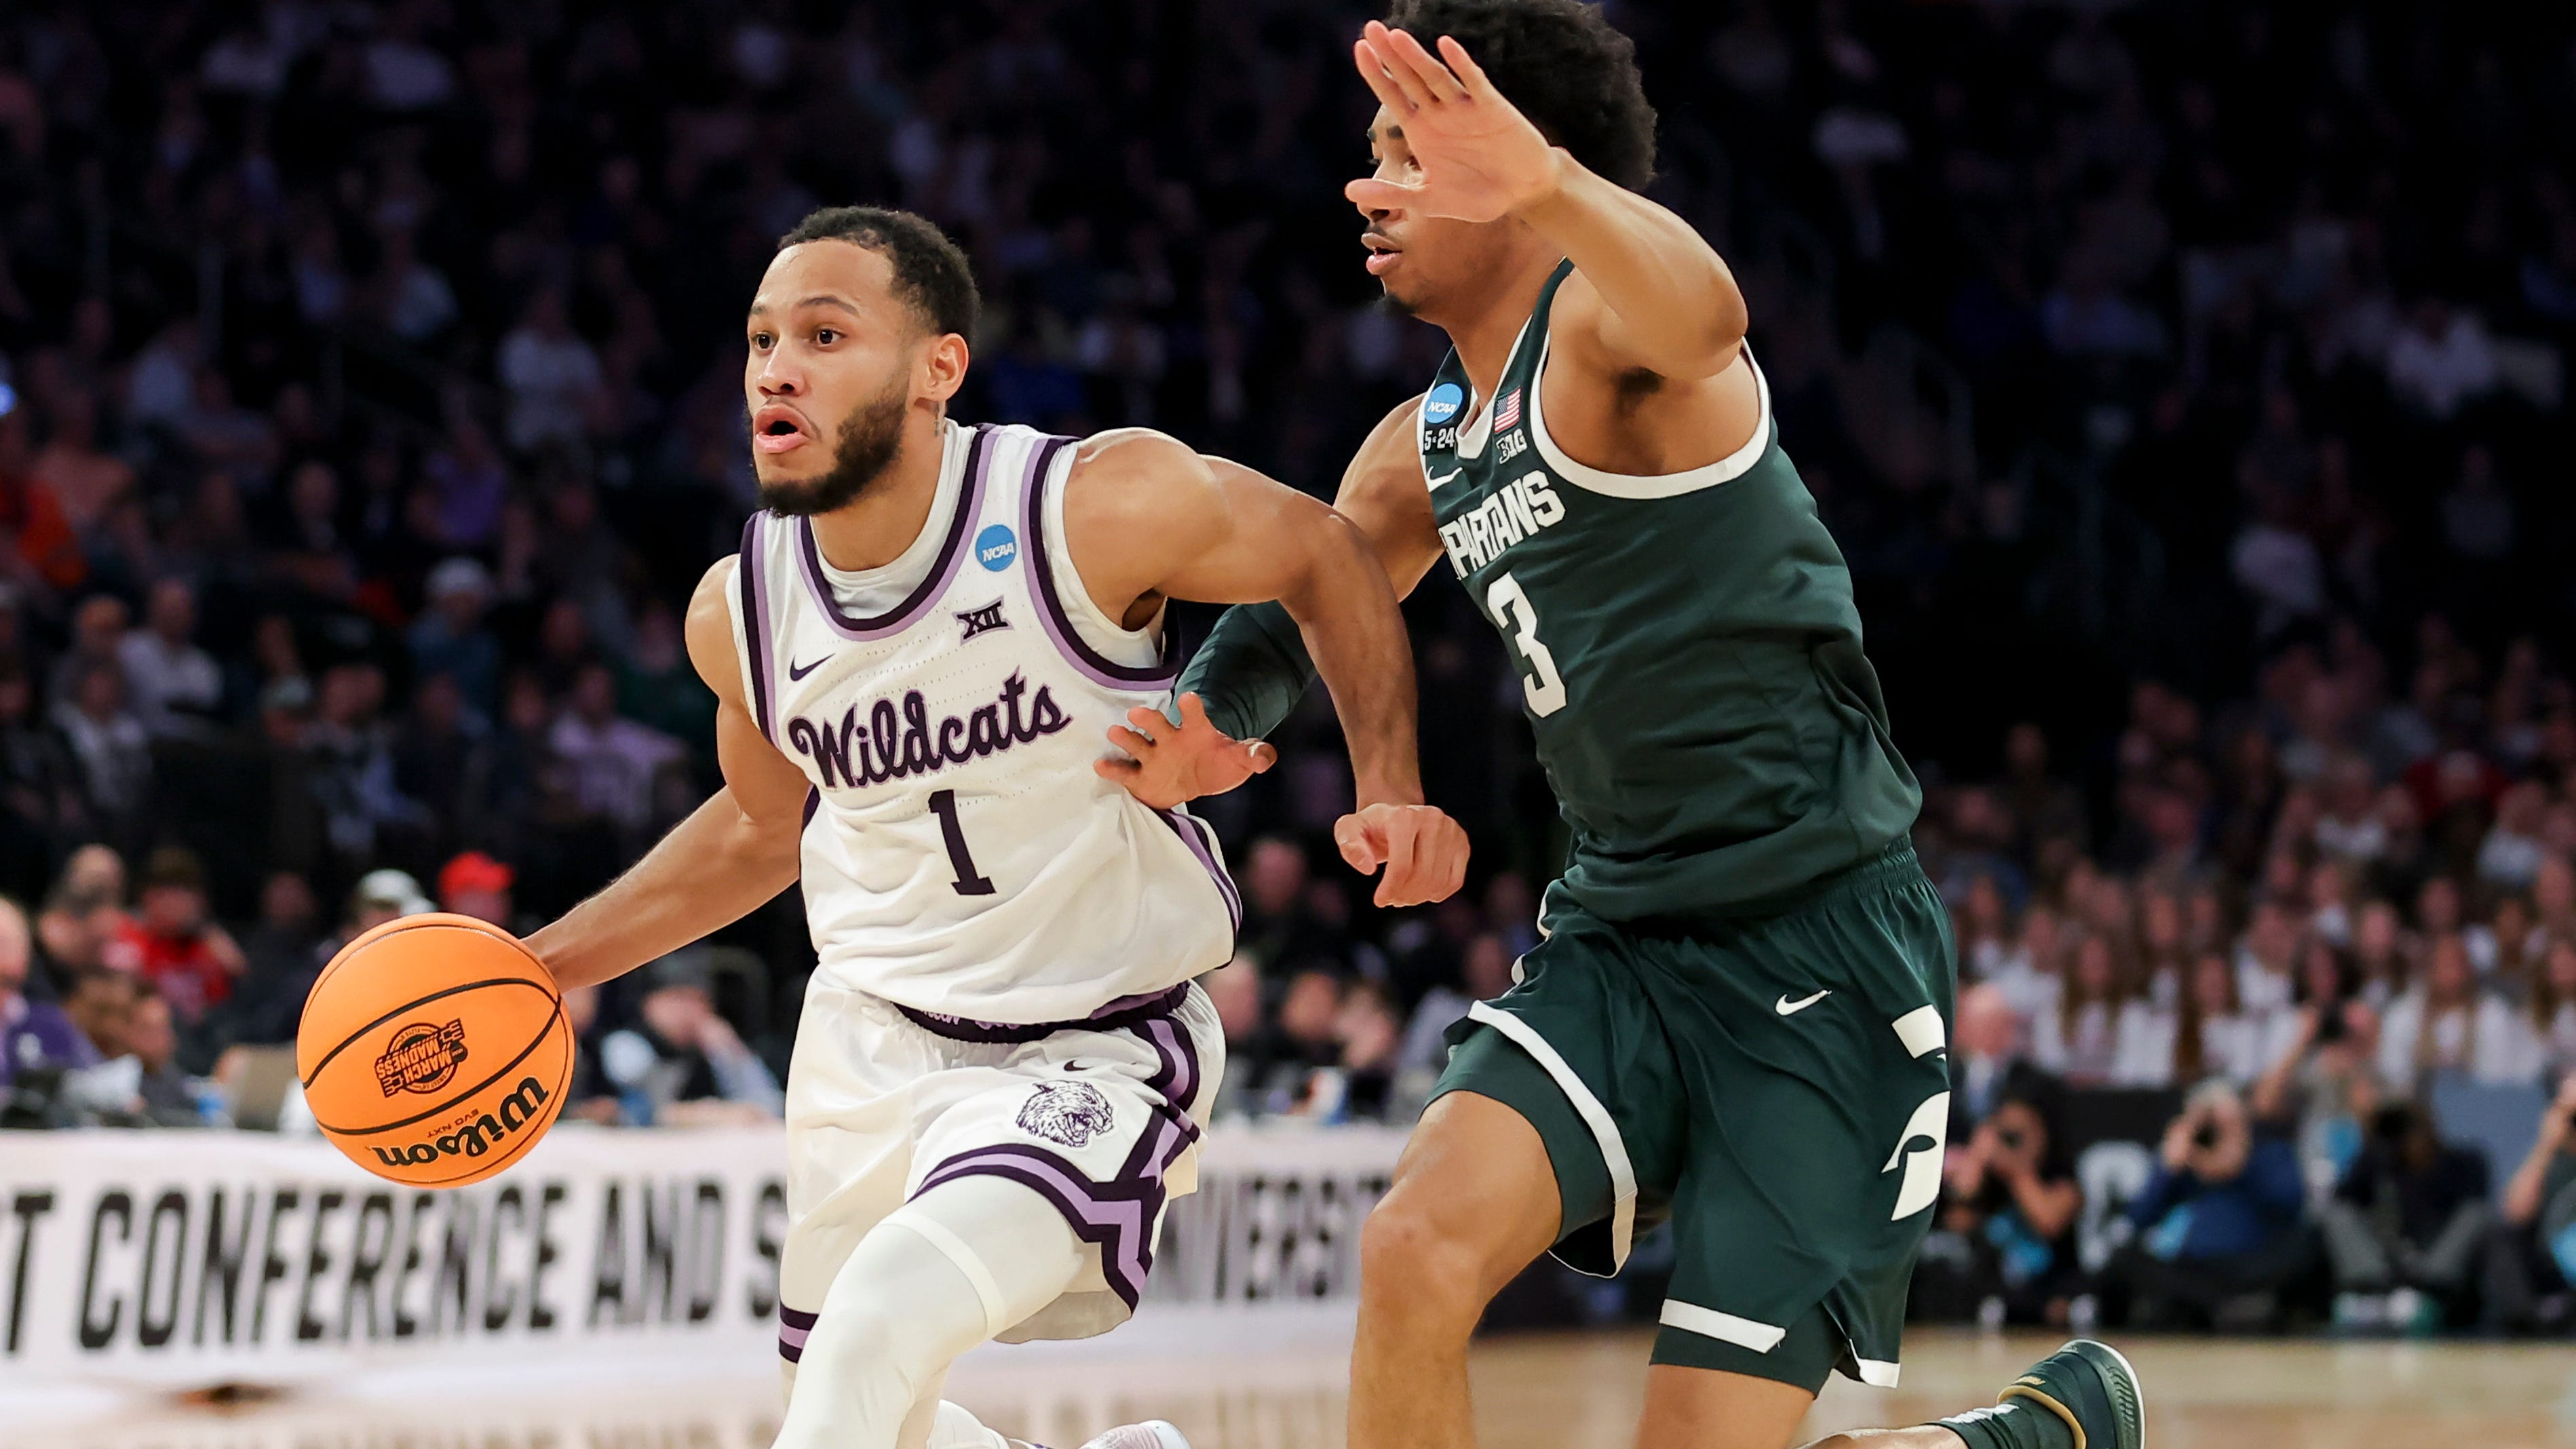 Kansas State guard Markquis Nowell (1) drives to the basket against Michigan State guard Jaden Akins during the first half of their NCAA men's tournament game at Madison Square Garden.